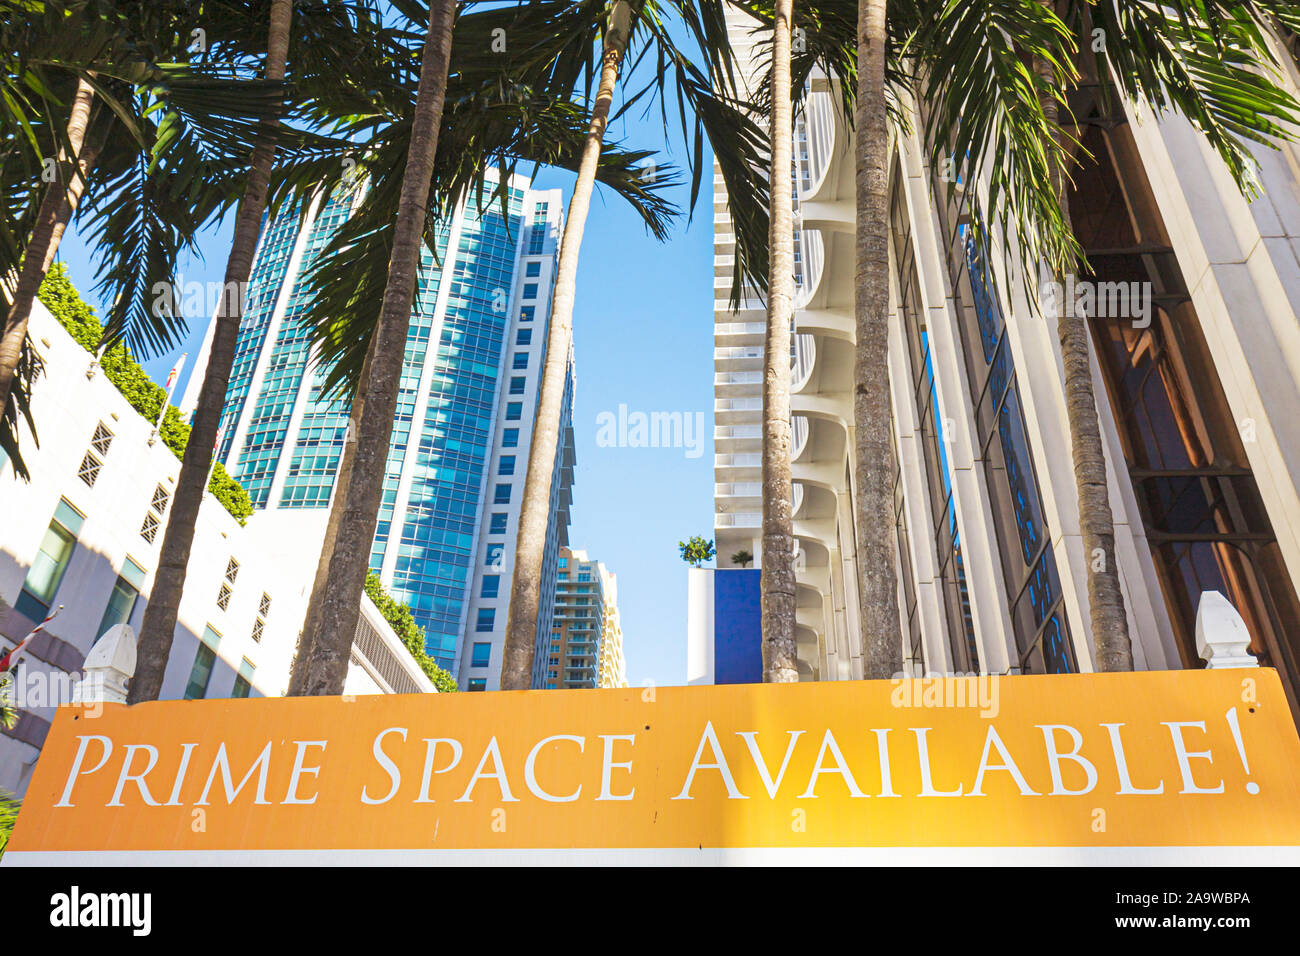 Miami Florida,Brickell District,downtown skyline,sign,prime space available,urban,FL100123036 Stock Photo